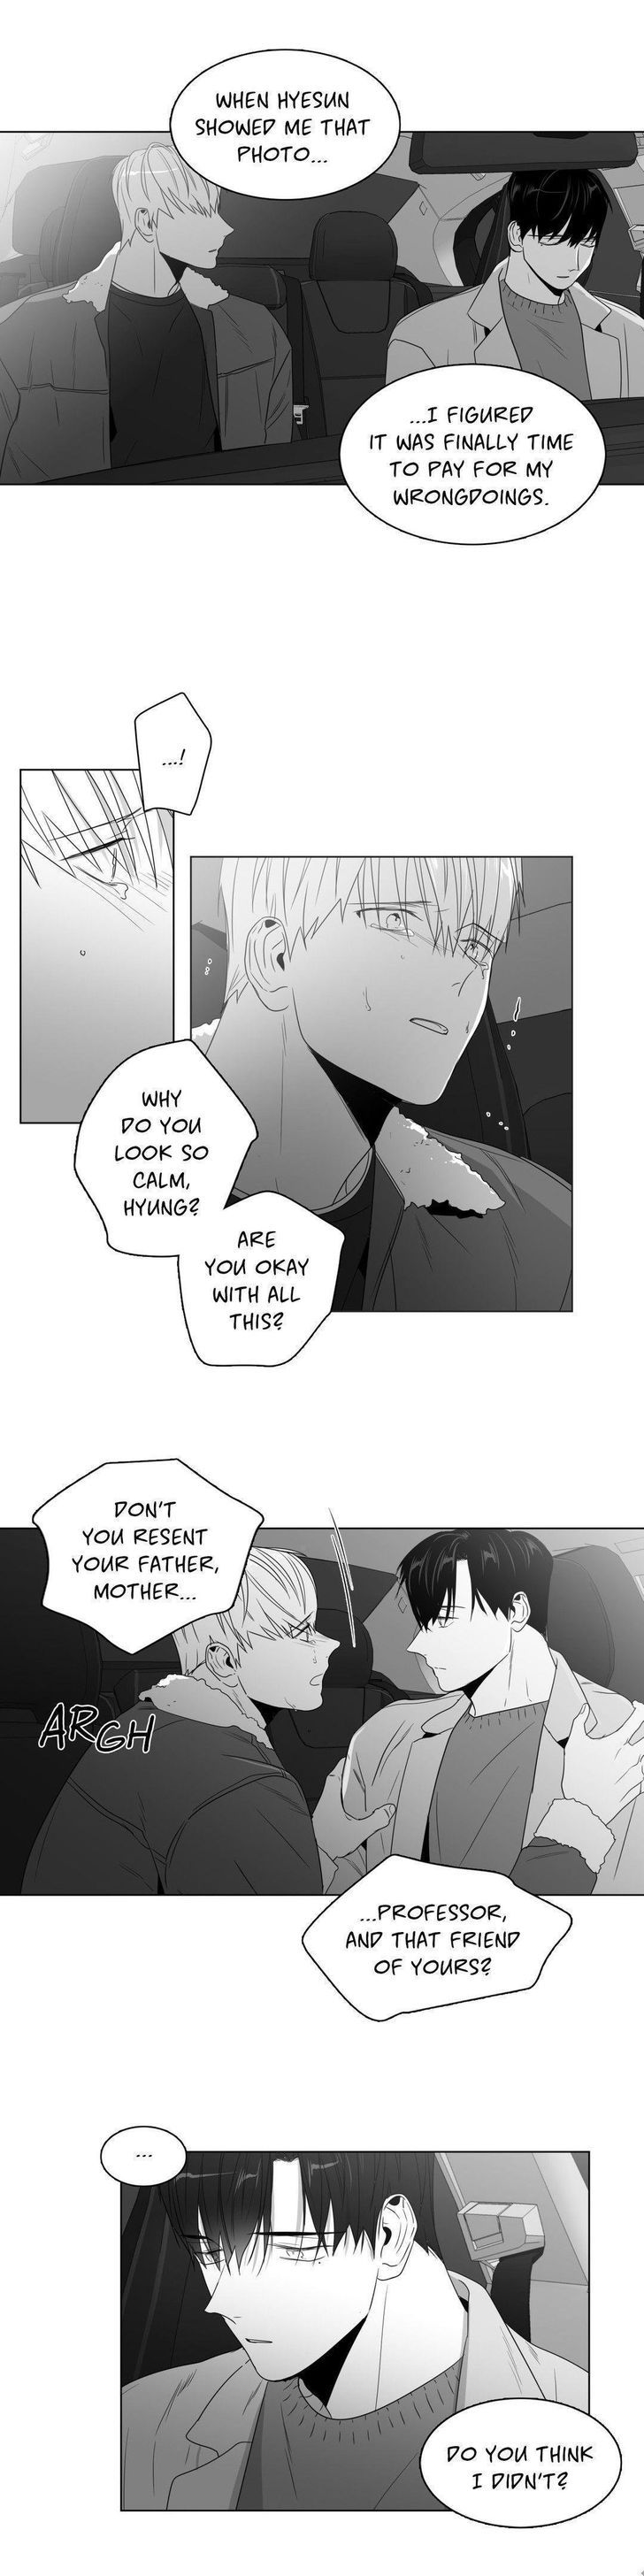 Lover Boy (Lezhin) Chapter 064 page 11